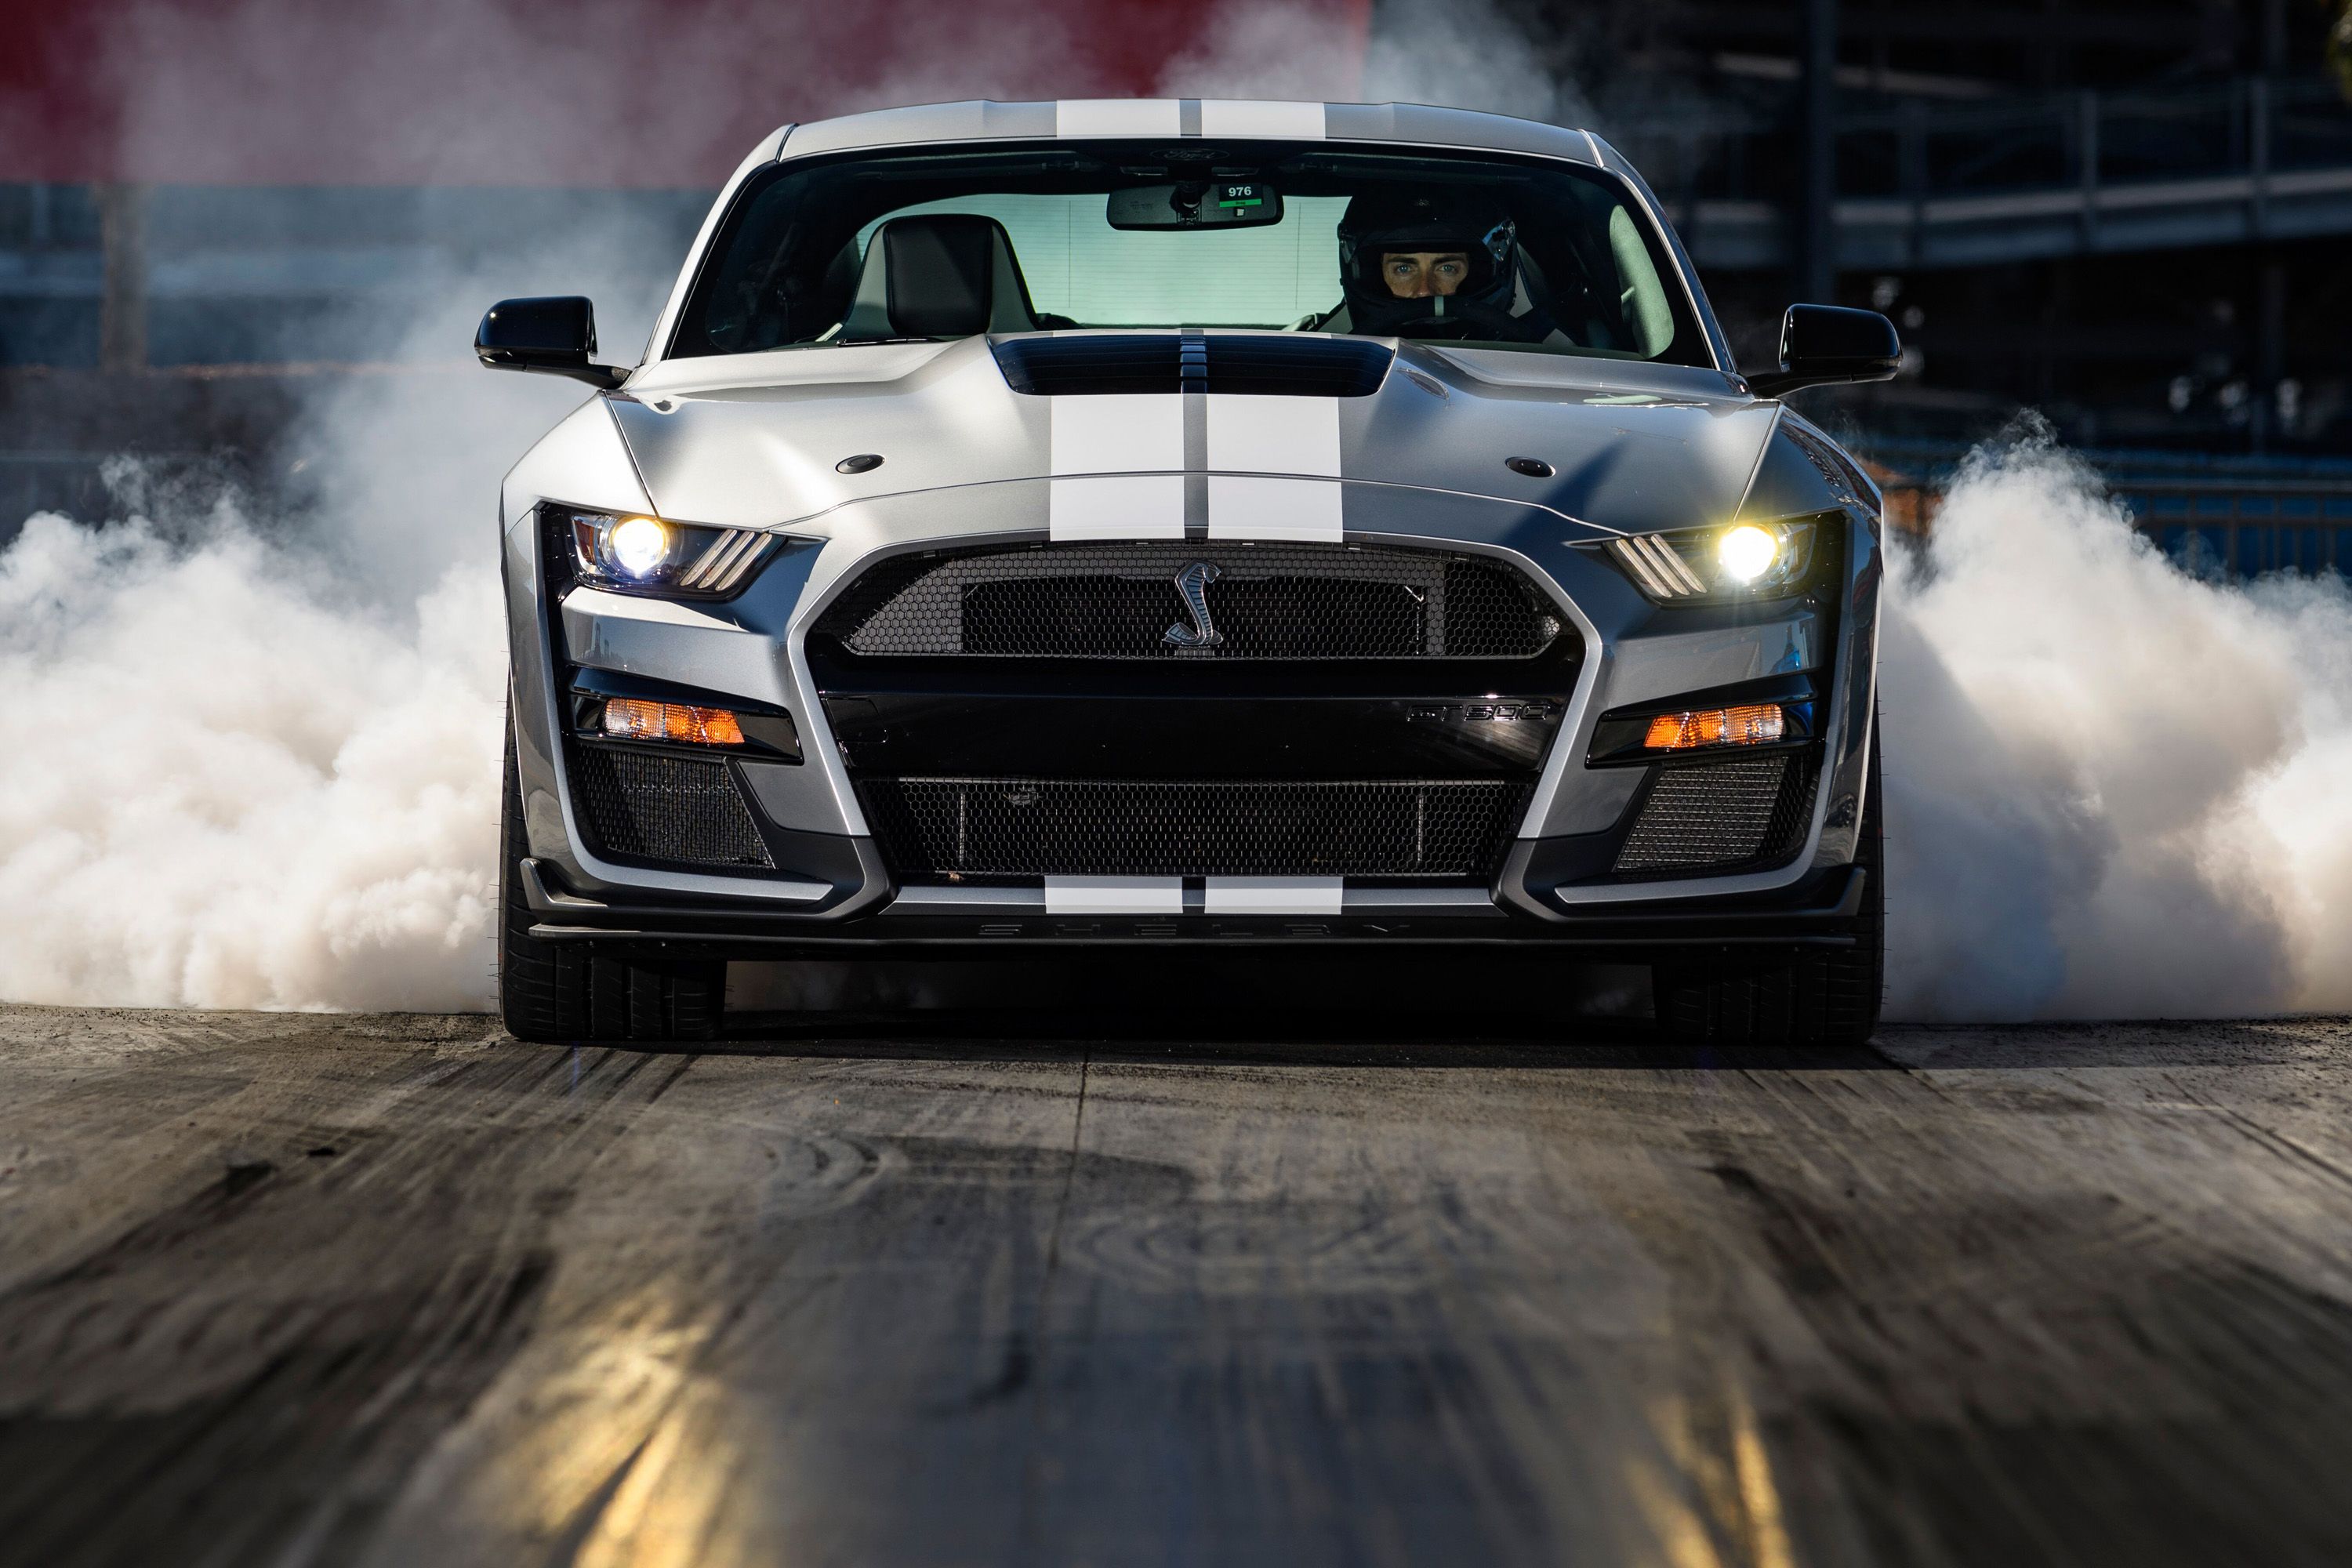 2020 Ford Mustang Shelby GT500 First Drive Review - Road & Track